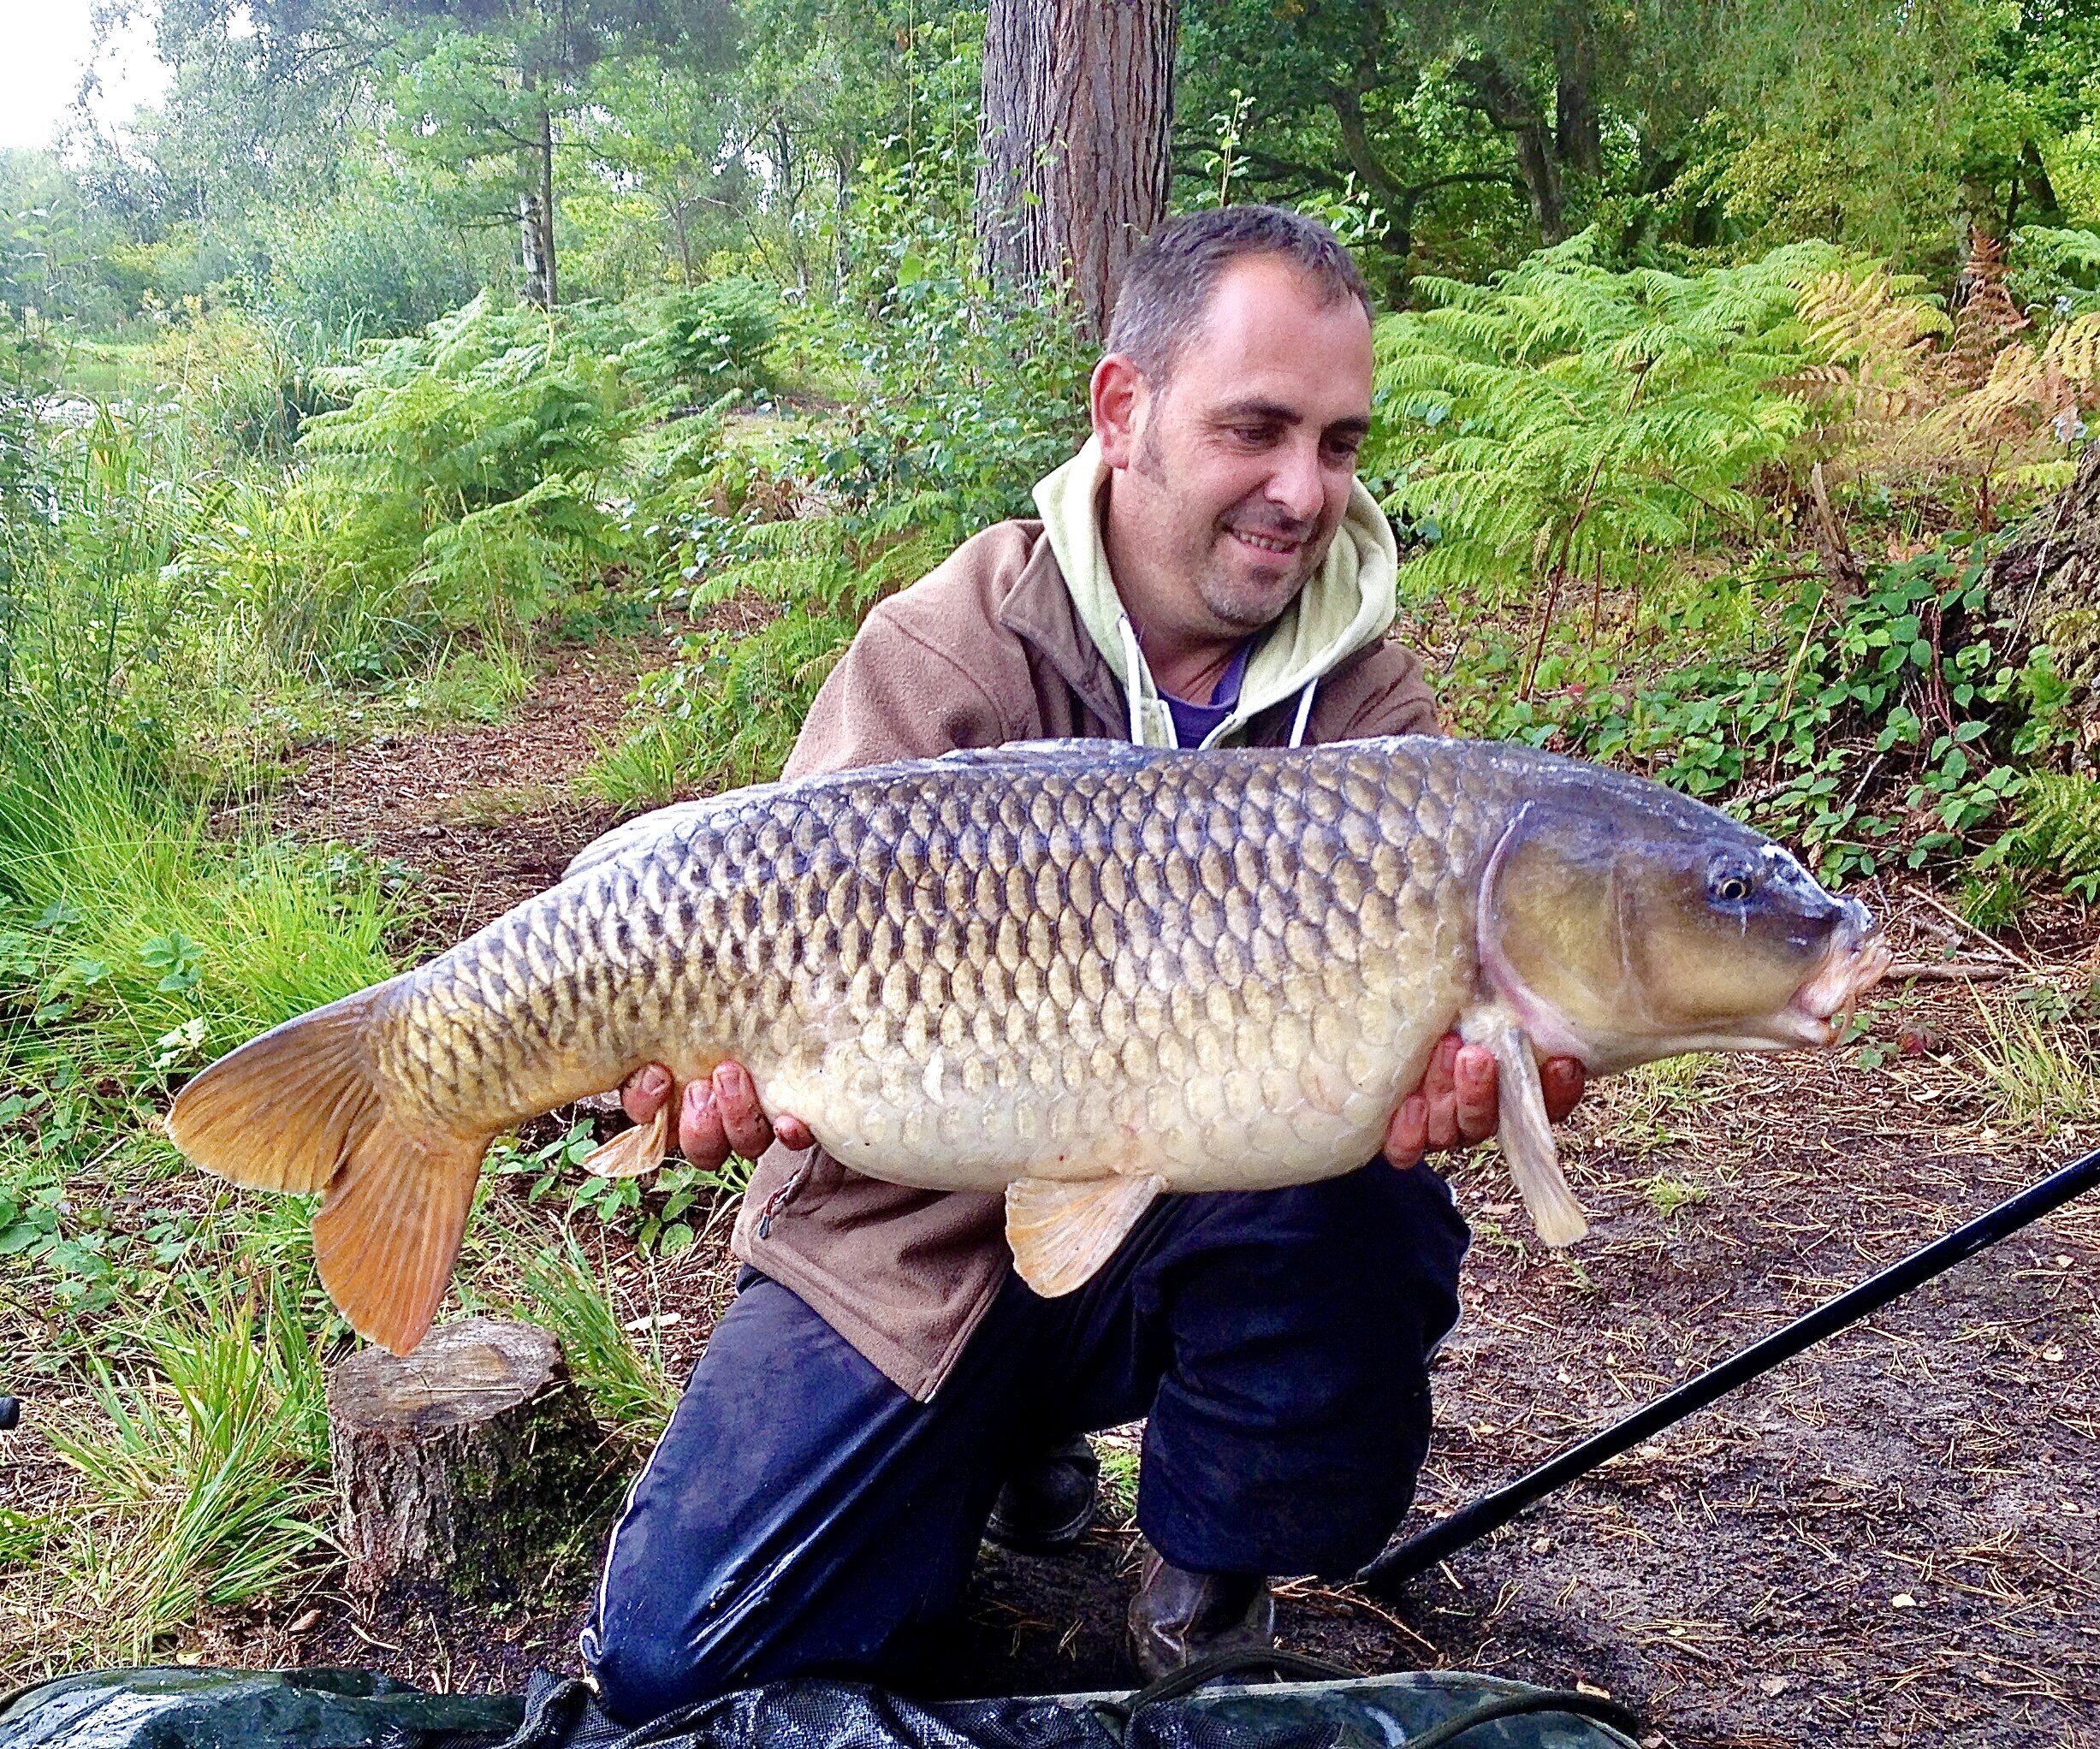 Angling club set to lose their historic carp — Angling Times